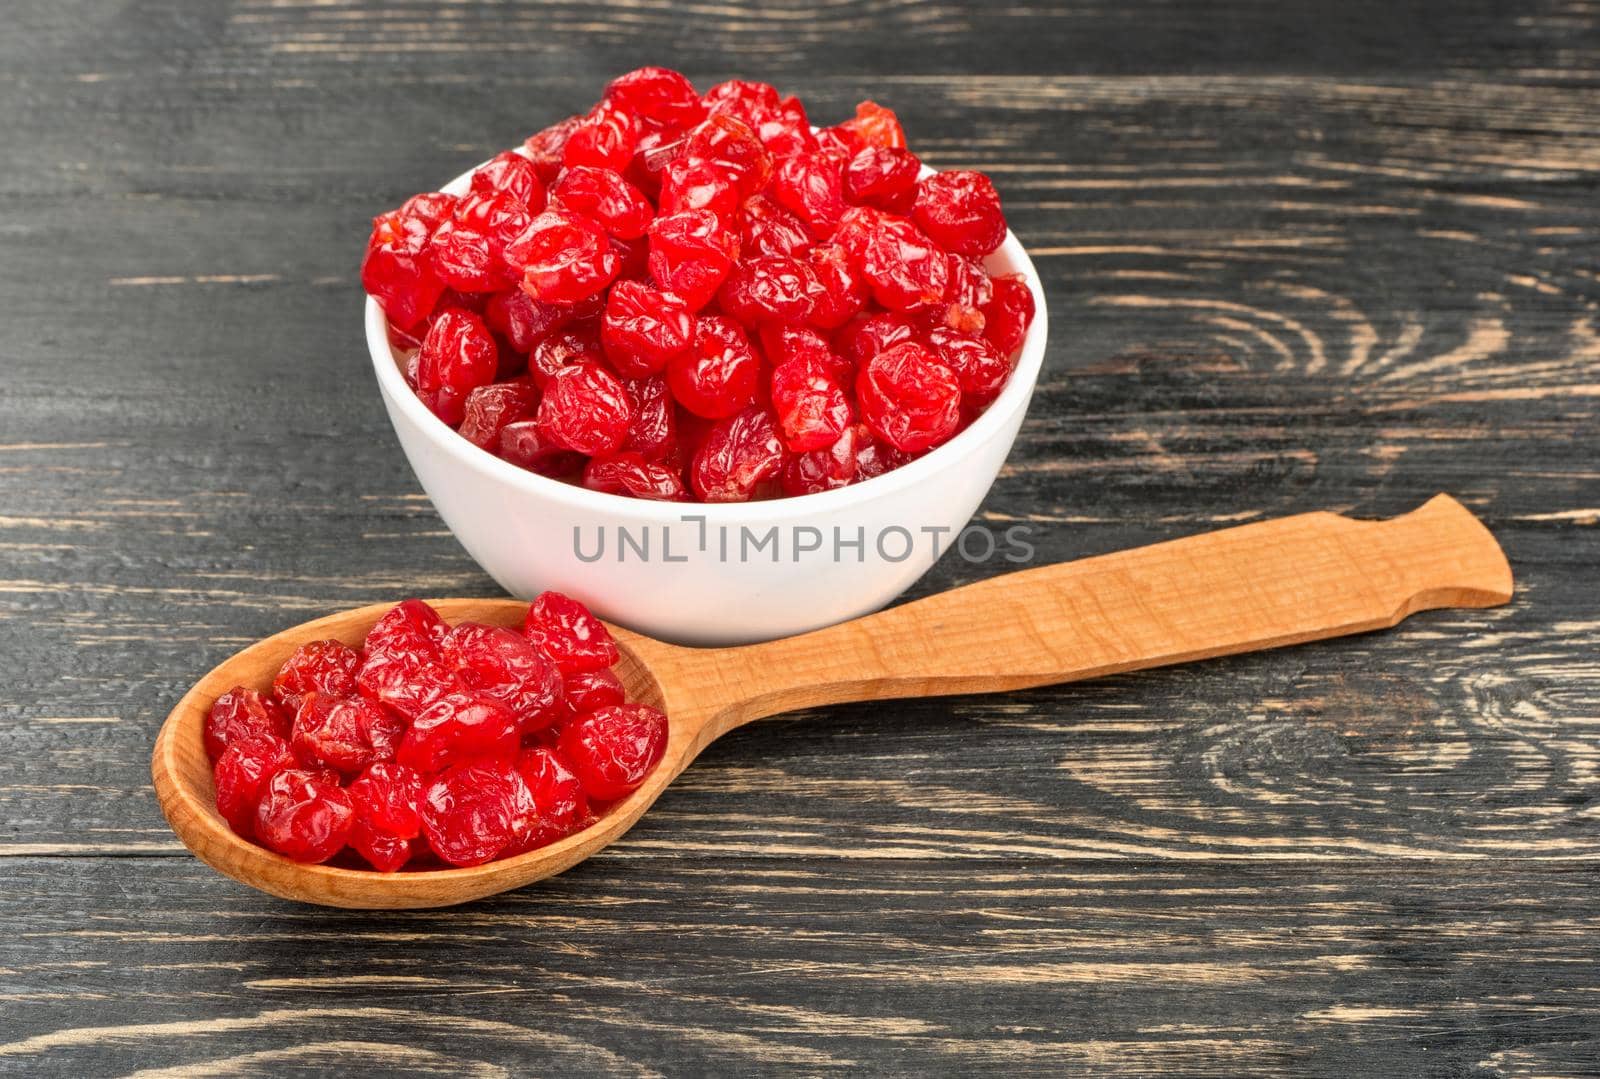 Delicious dried cherries in a spoon and bowl on wooden background